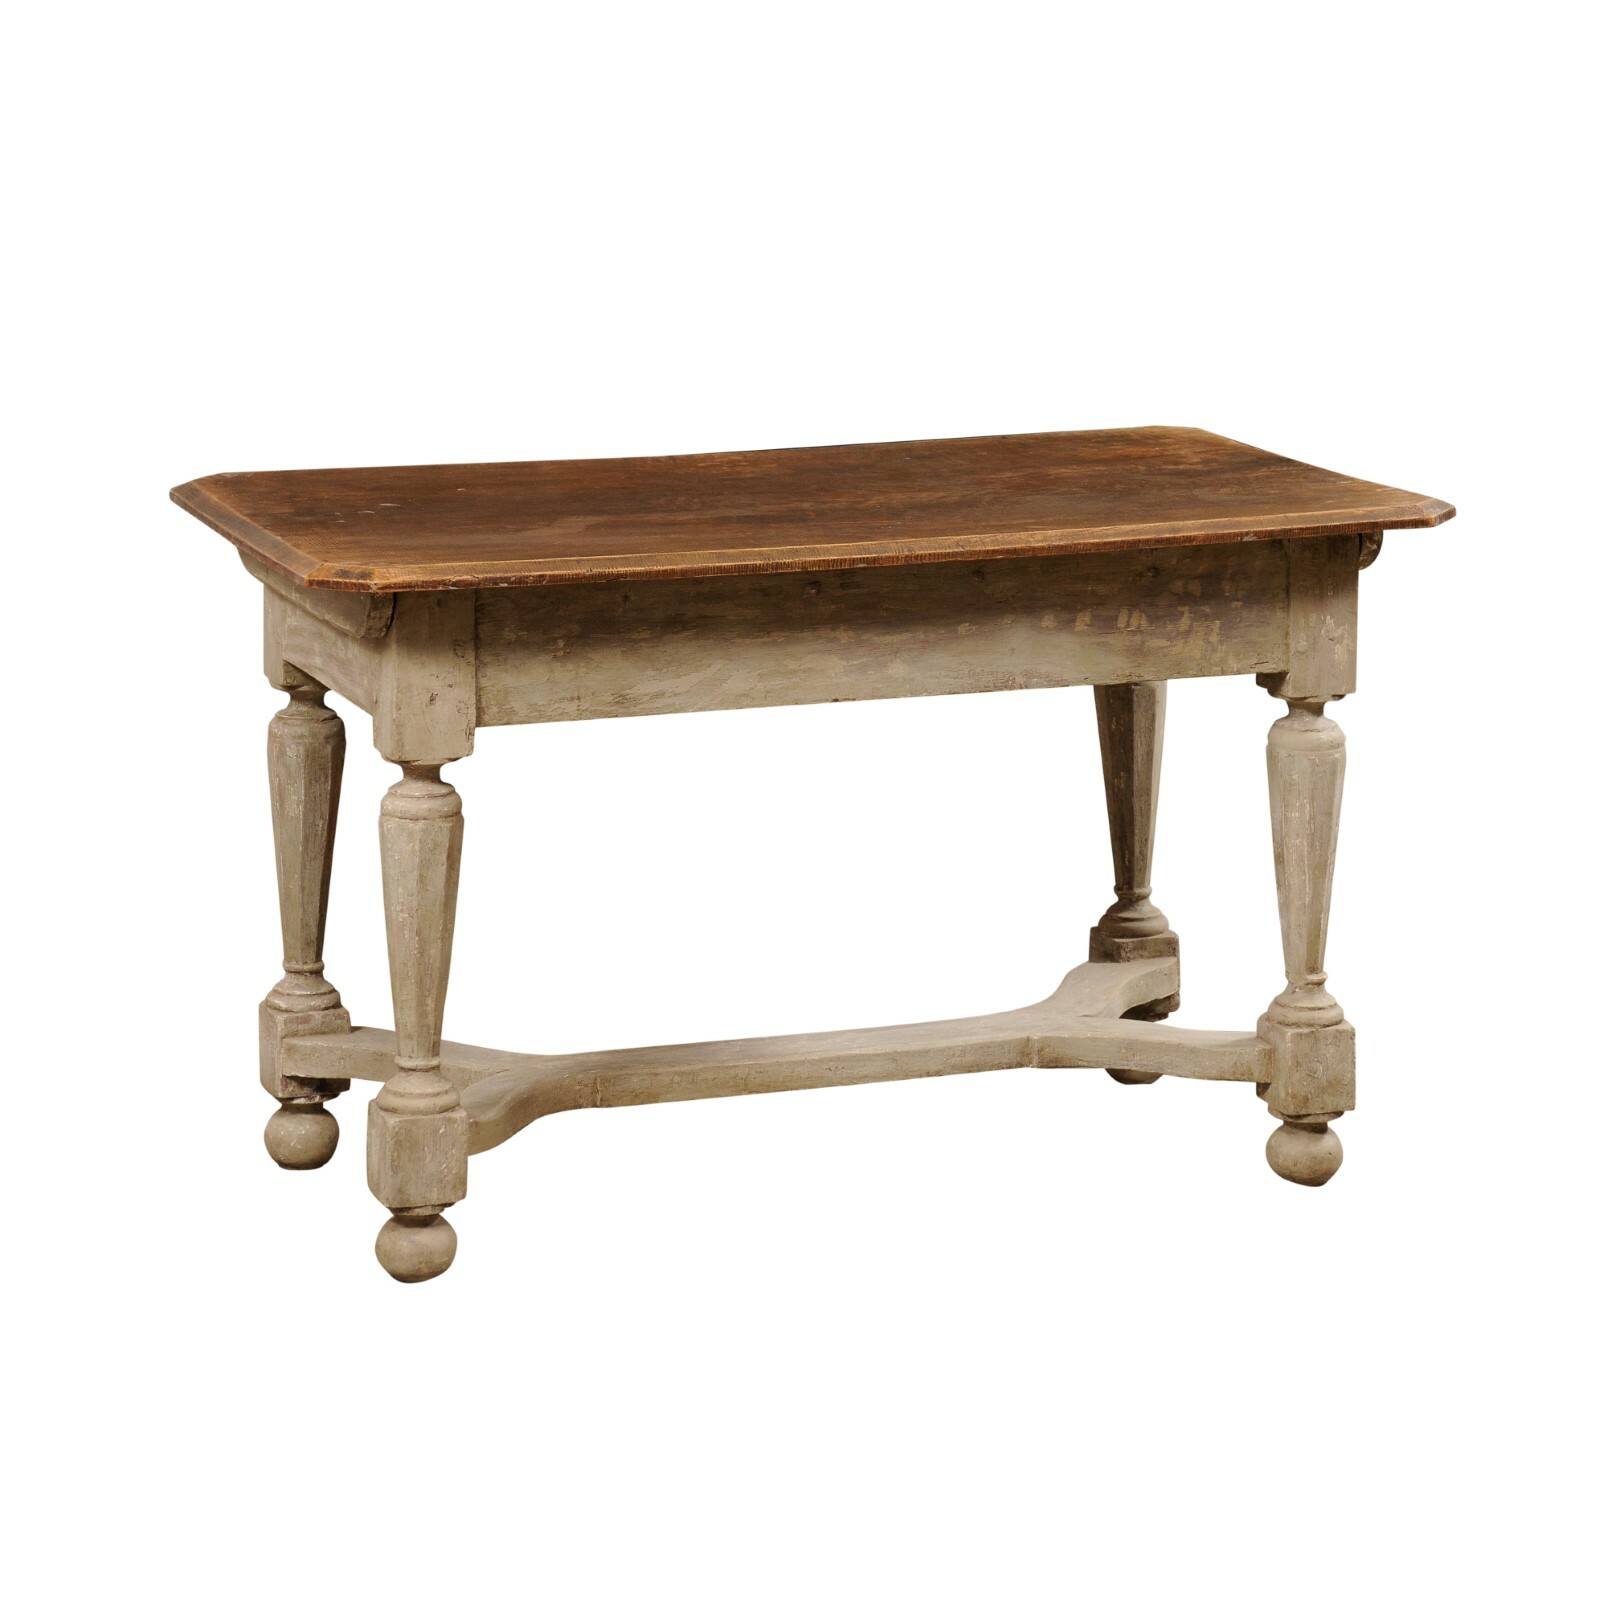 Swedish Period Baroque Carved-Wood Table